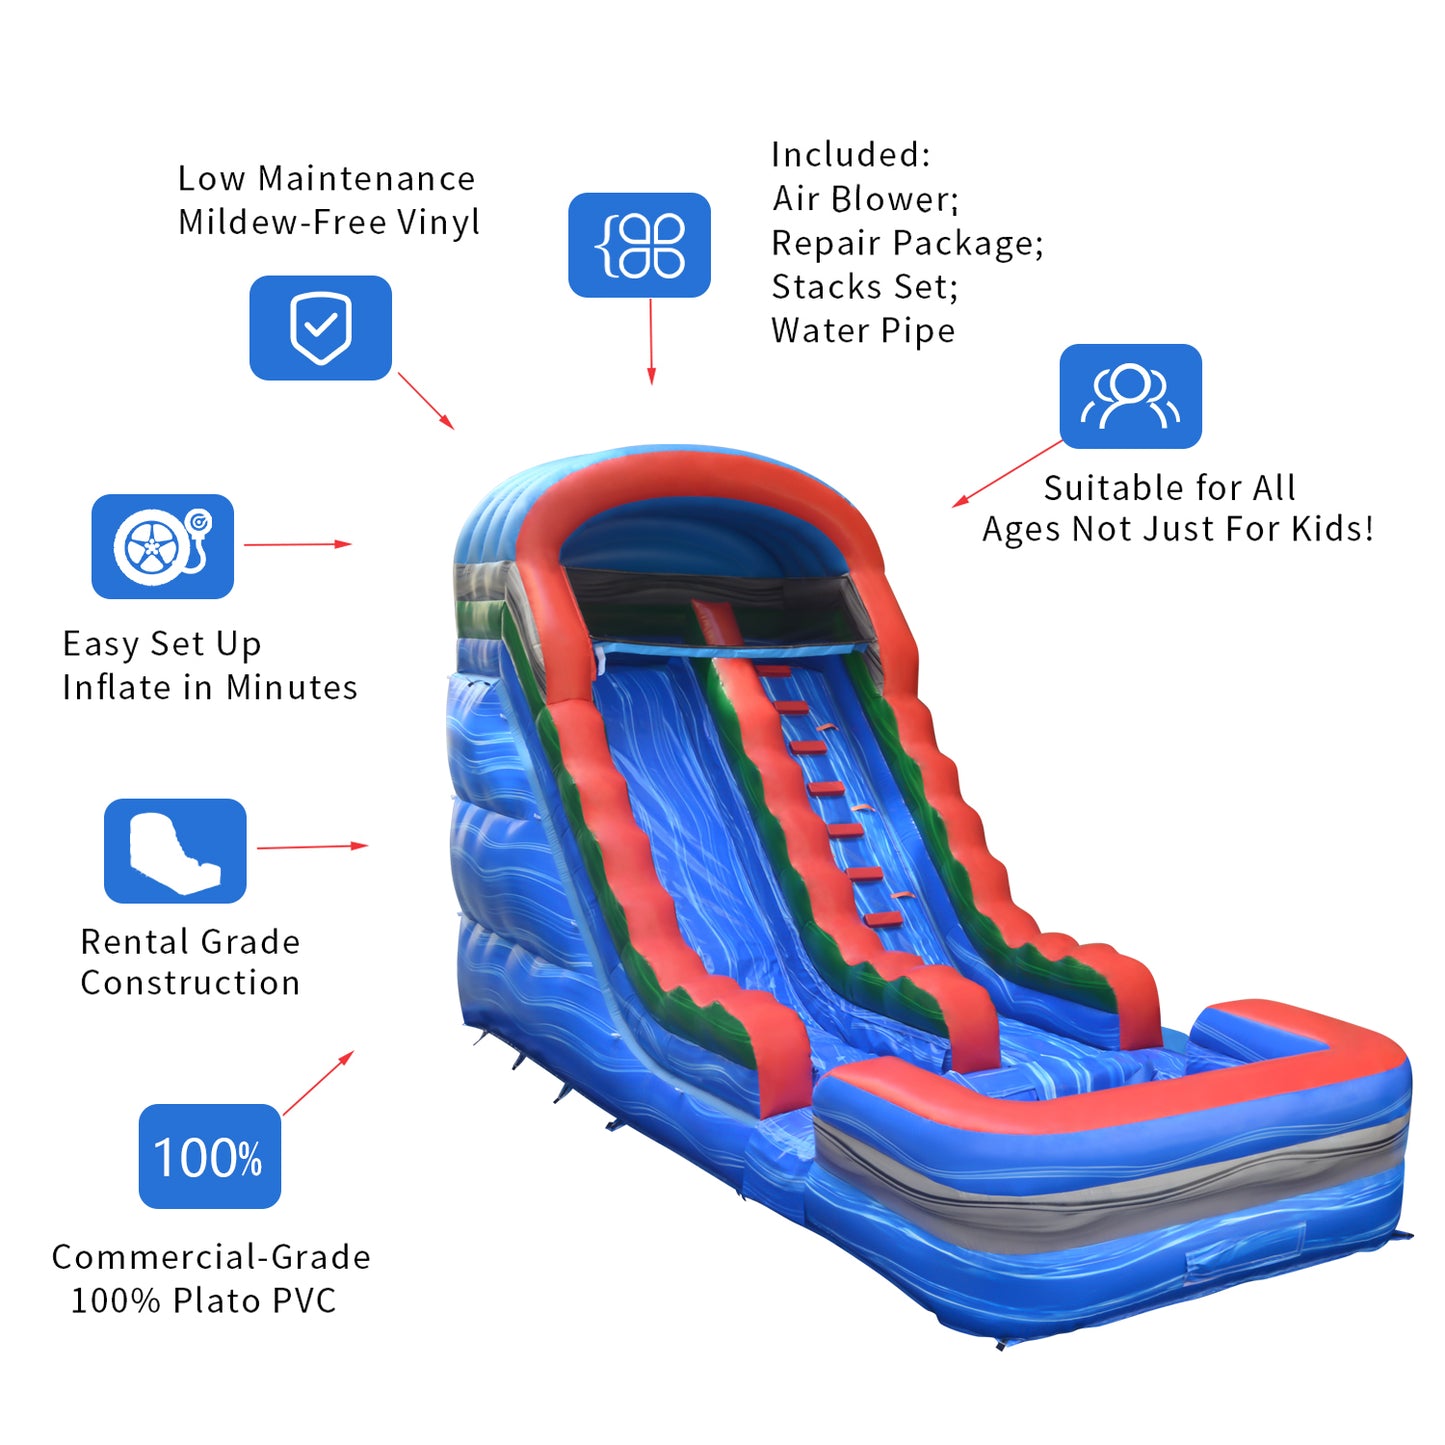 COMING Wet/Dry Skee Ball Commercial Inflatable Water Slide 26' x 11'x 16' H #11152